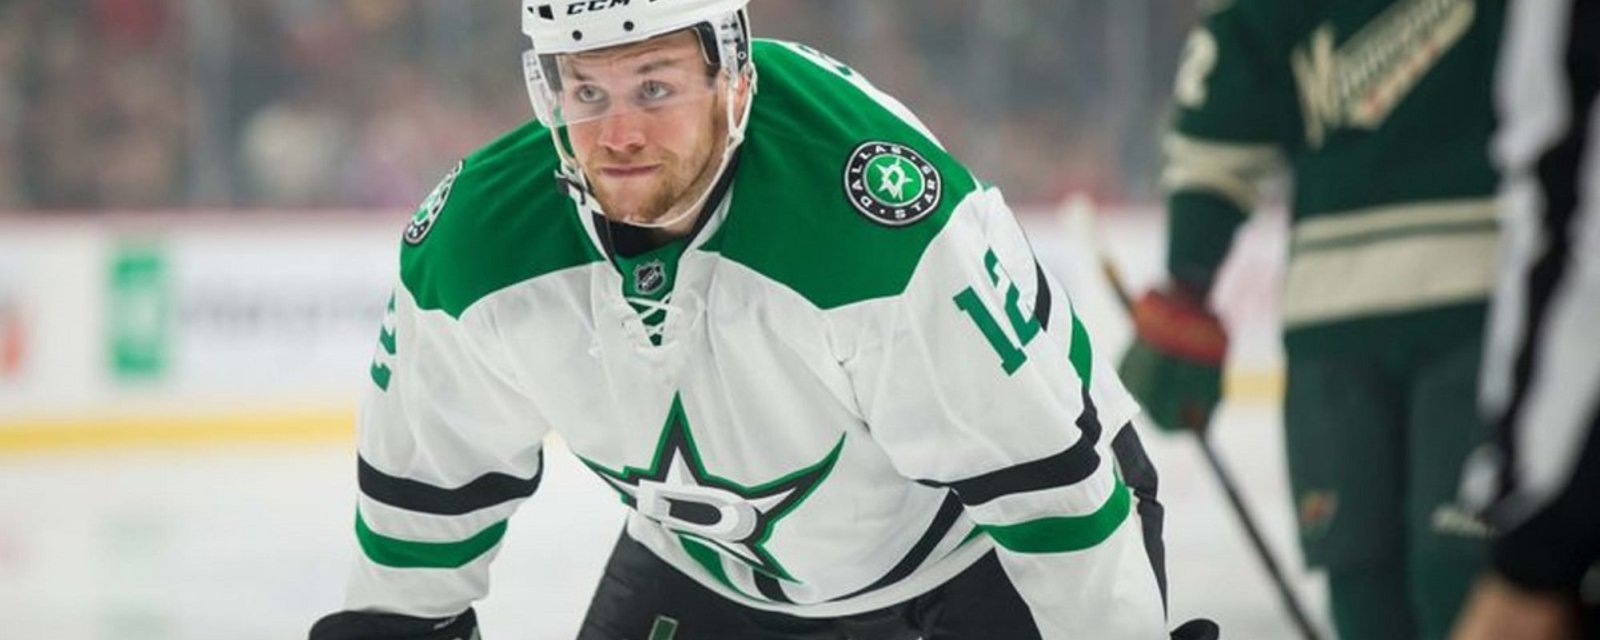 Radek Faksa signs a new 5 year contract.